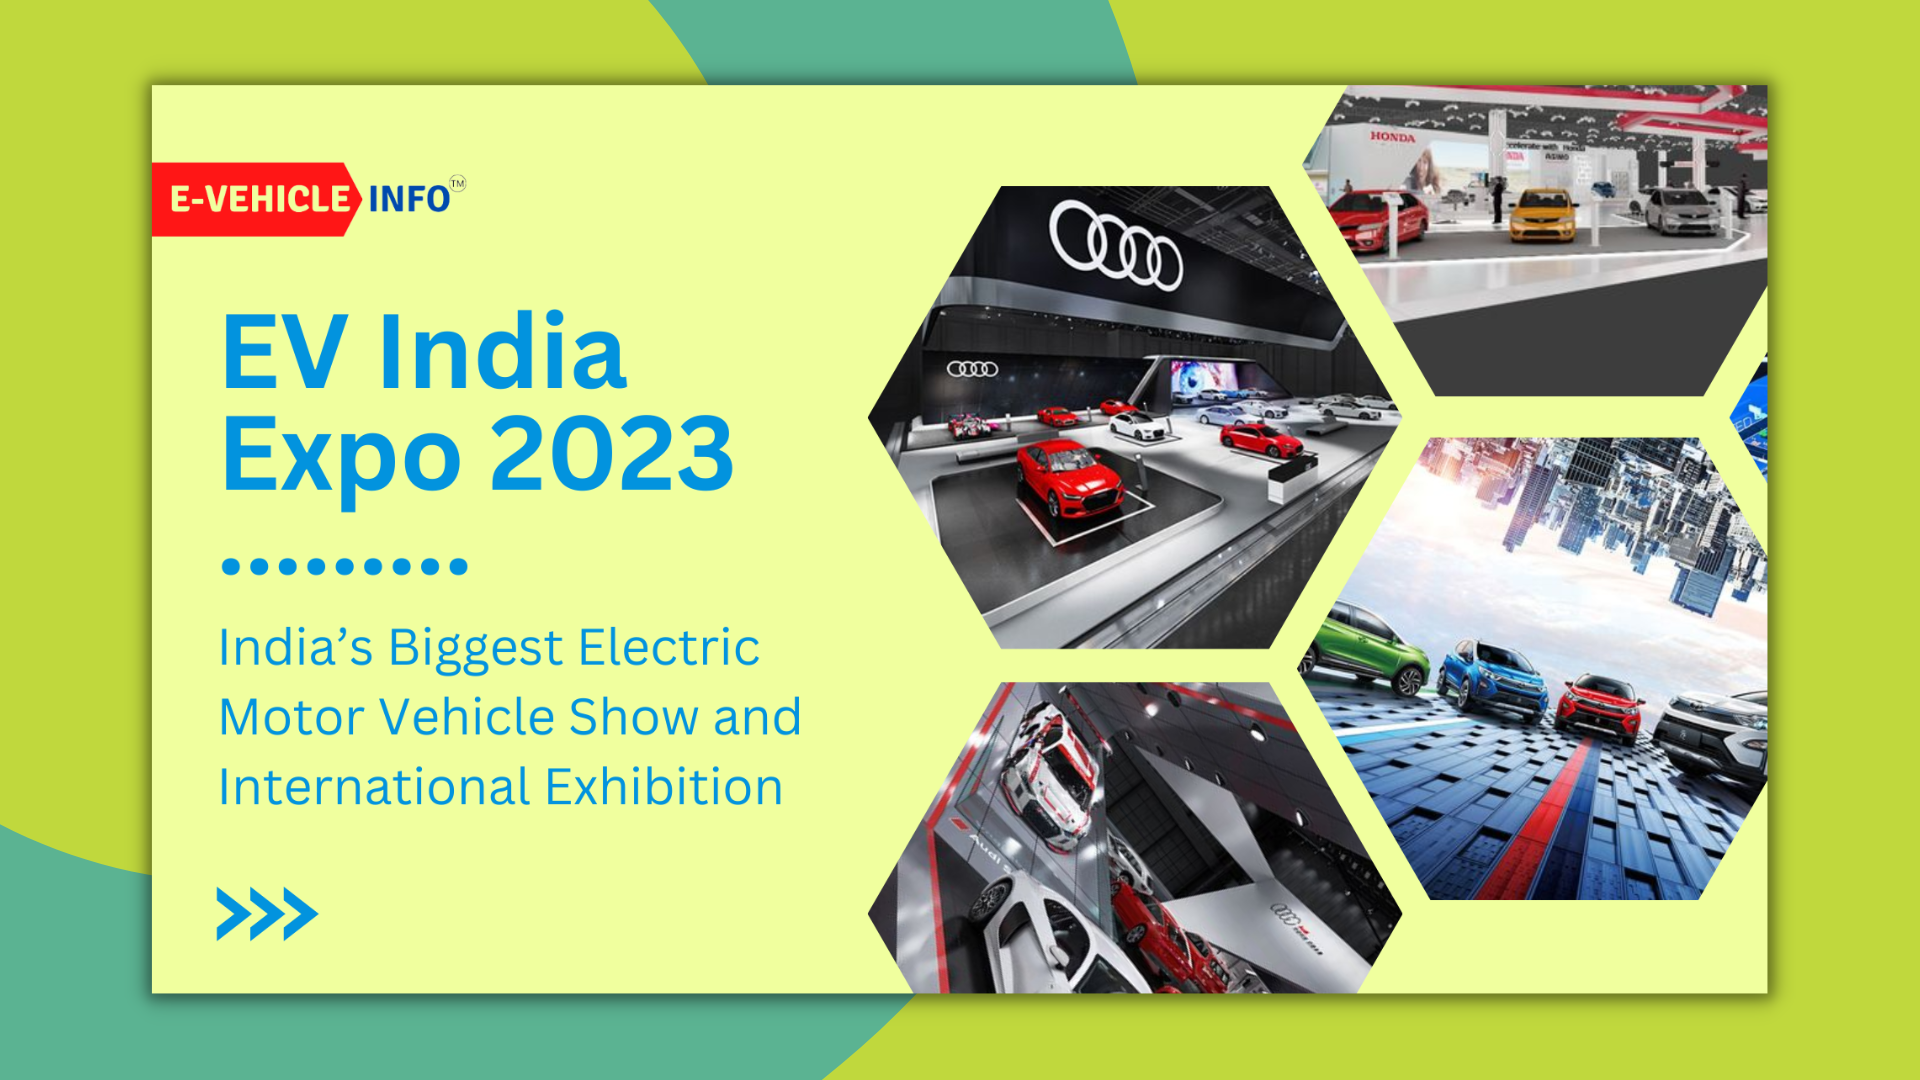 EV India Expo 2023 India’s Biggest Electric Motor Vehicle Show and